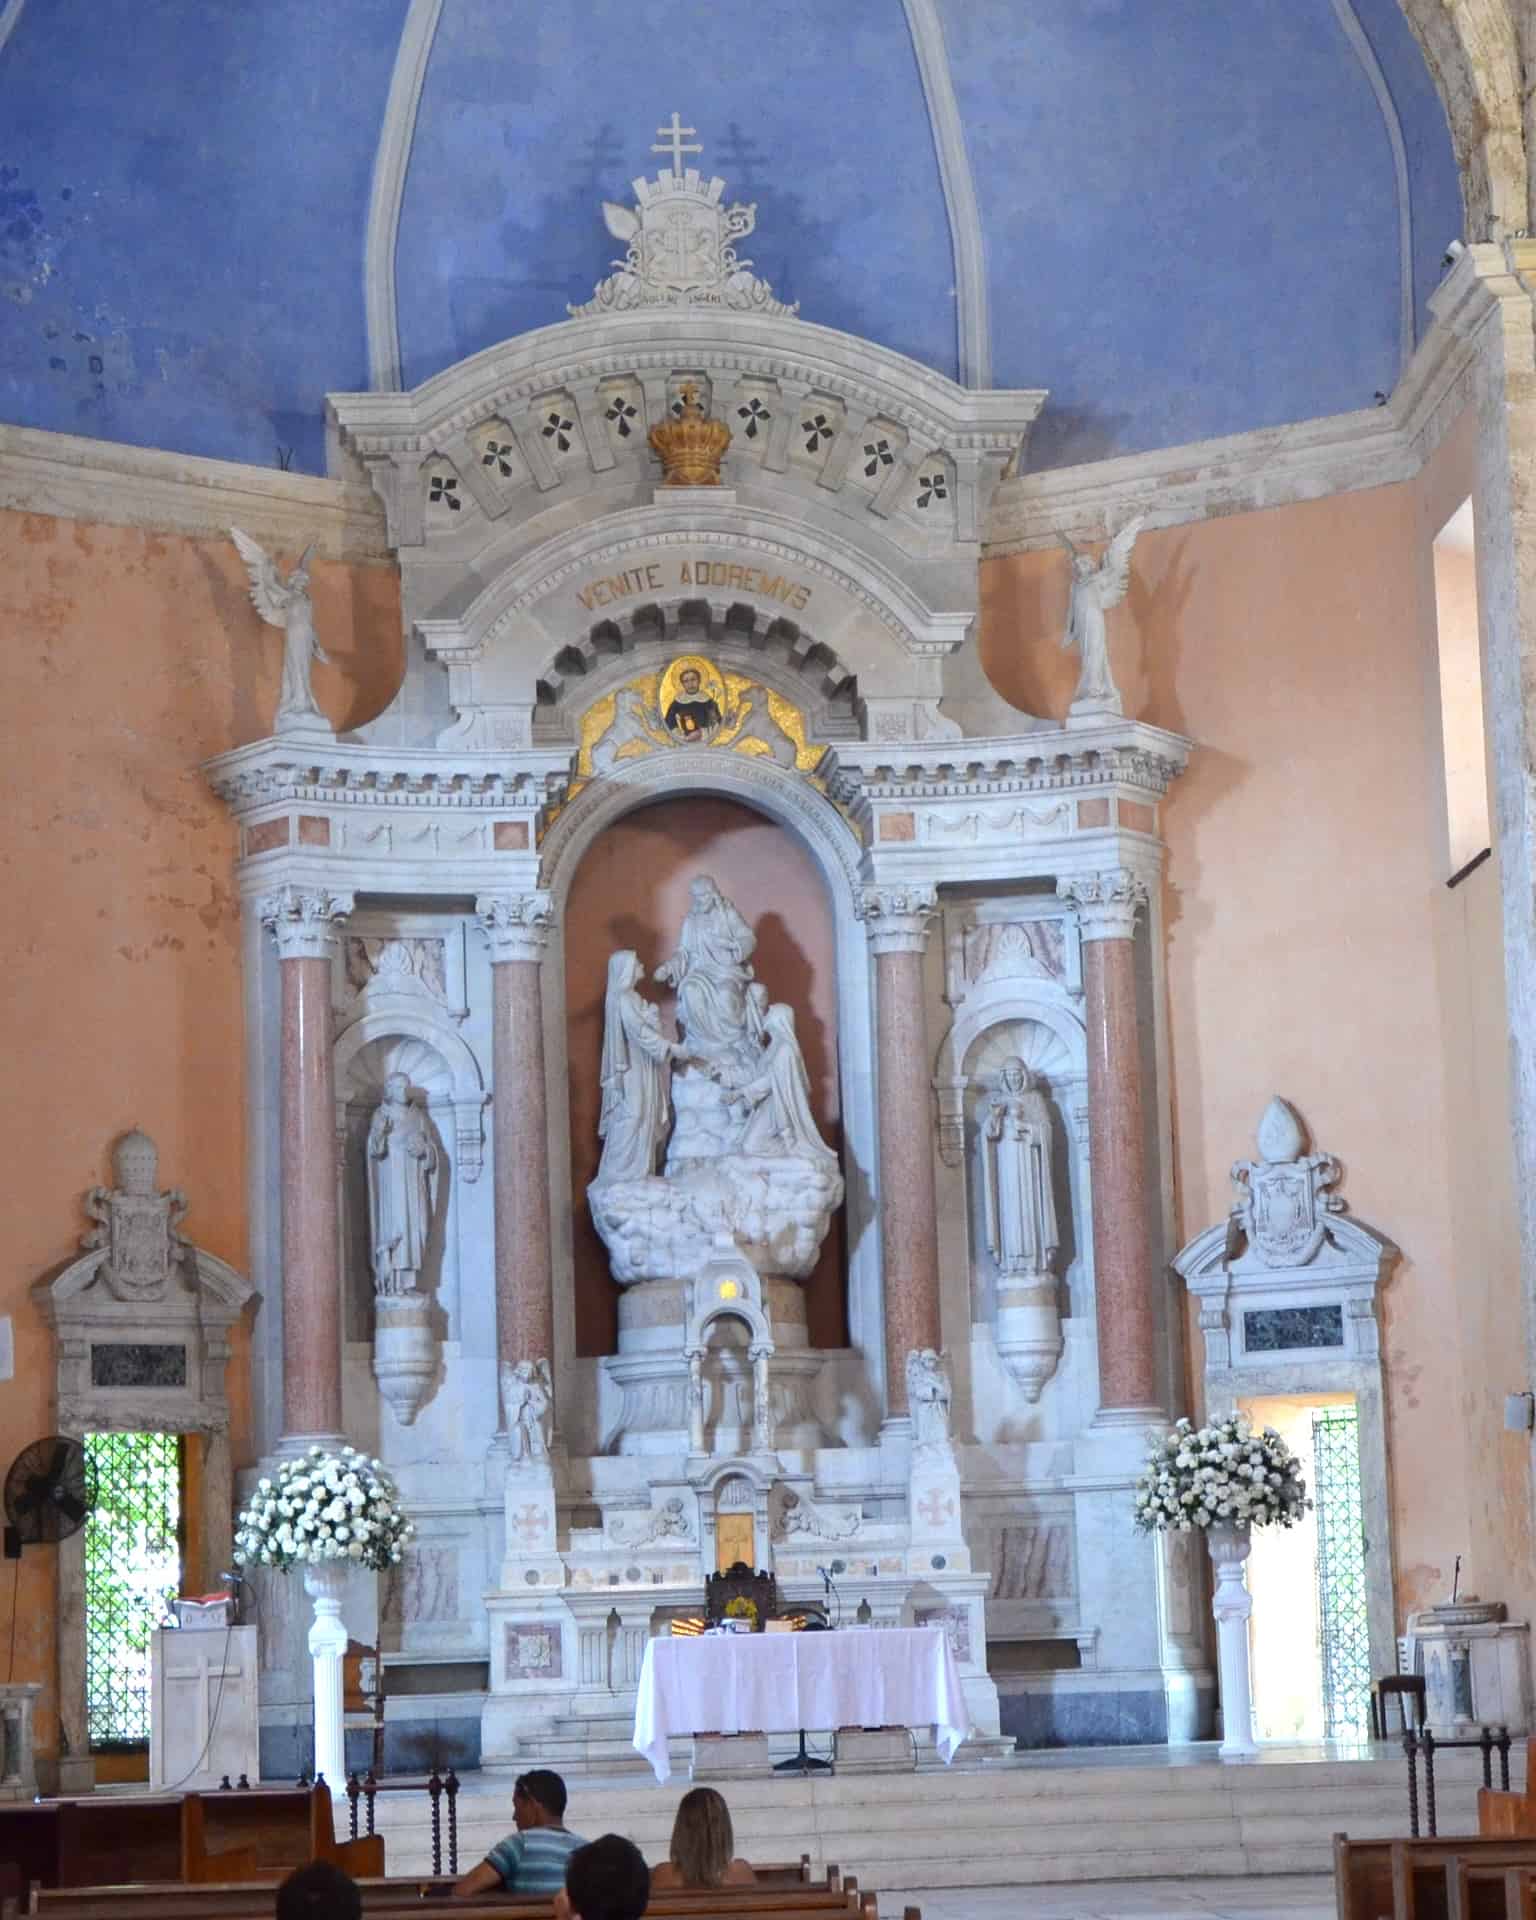 Main altar of the Church of Santo Domingo in the Old Town of Cartagena, Colombia